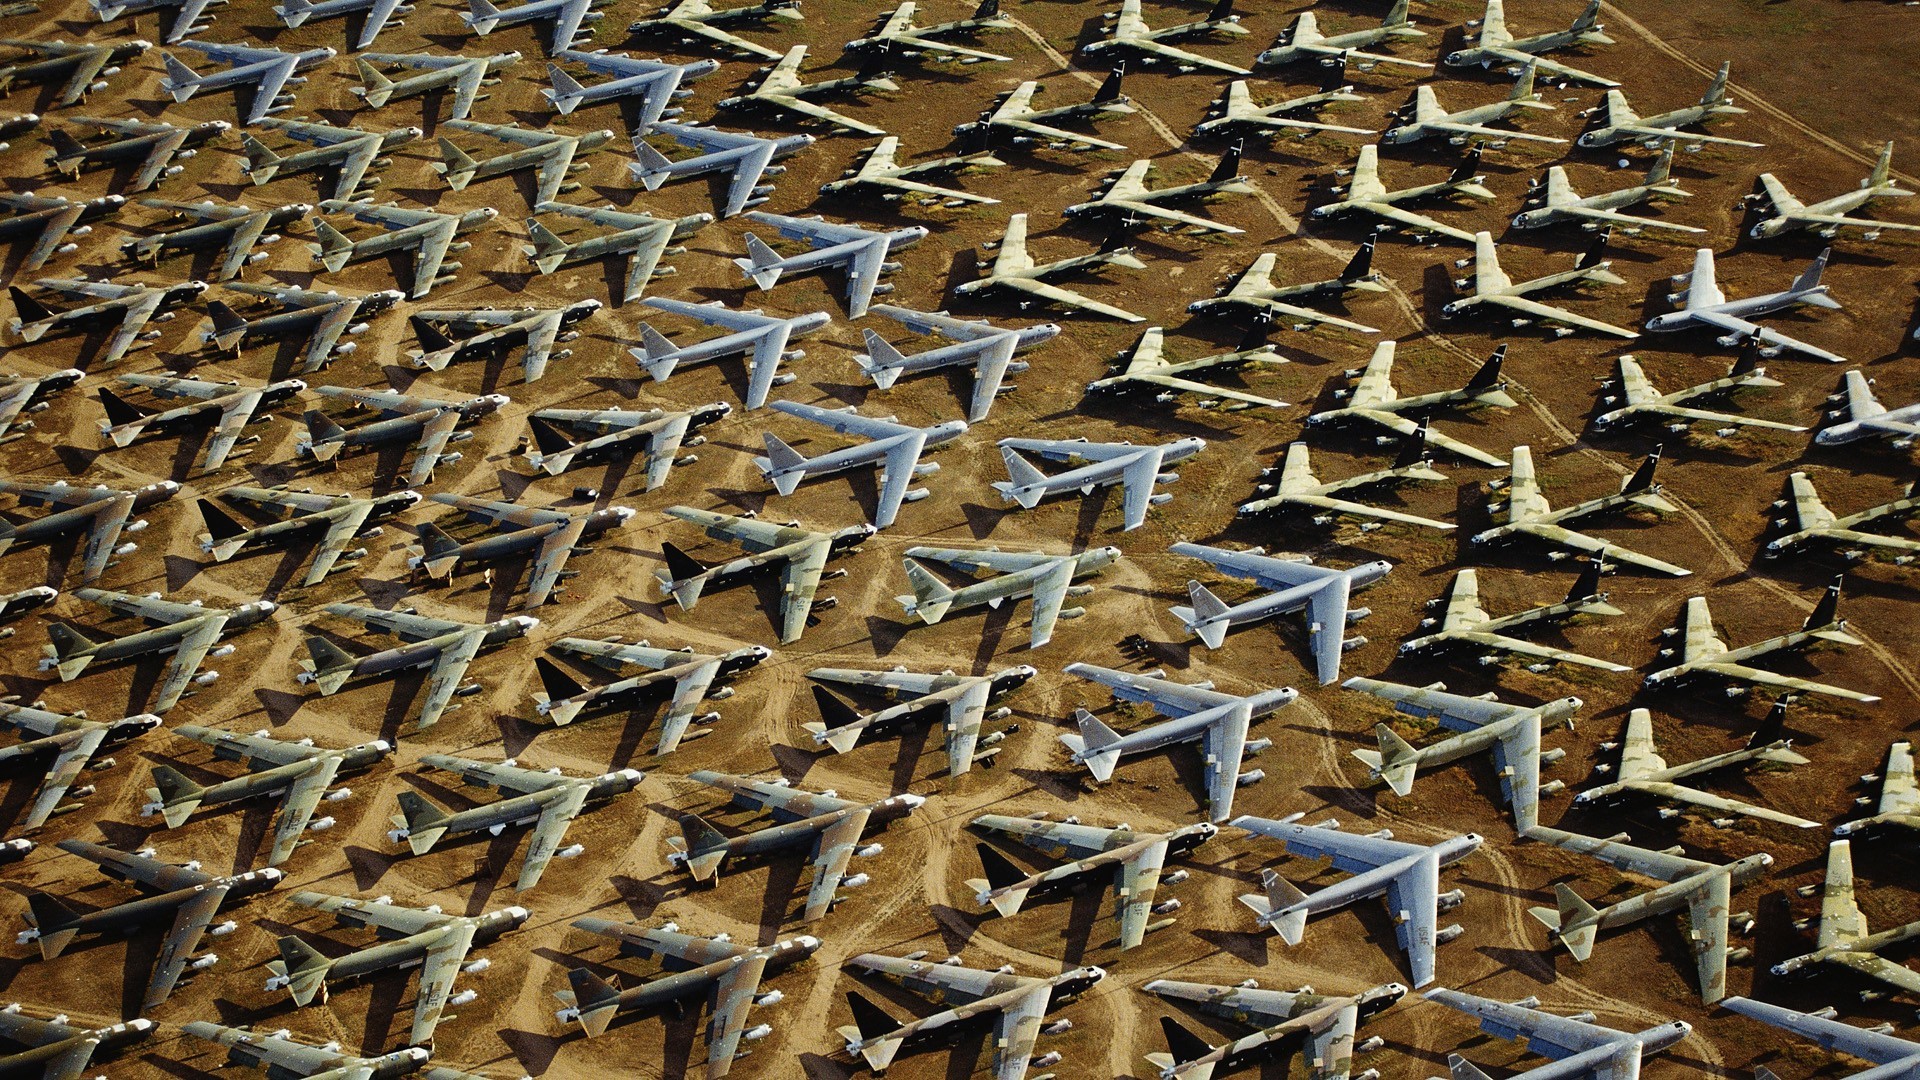 1920x1080 Boeing B-52 Stratofortress bombers in storage at Davis-Monthan Air Force  Base,